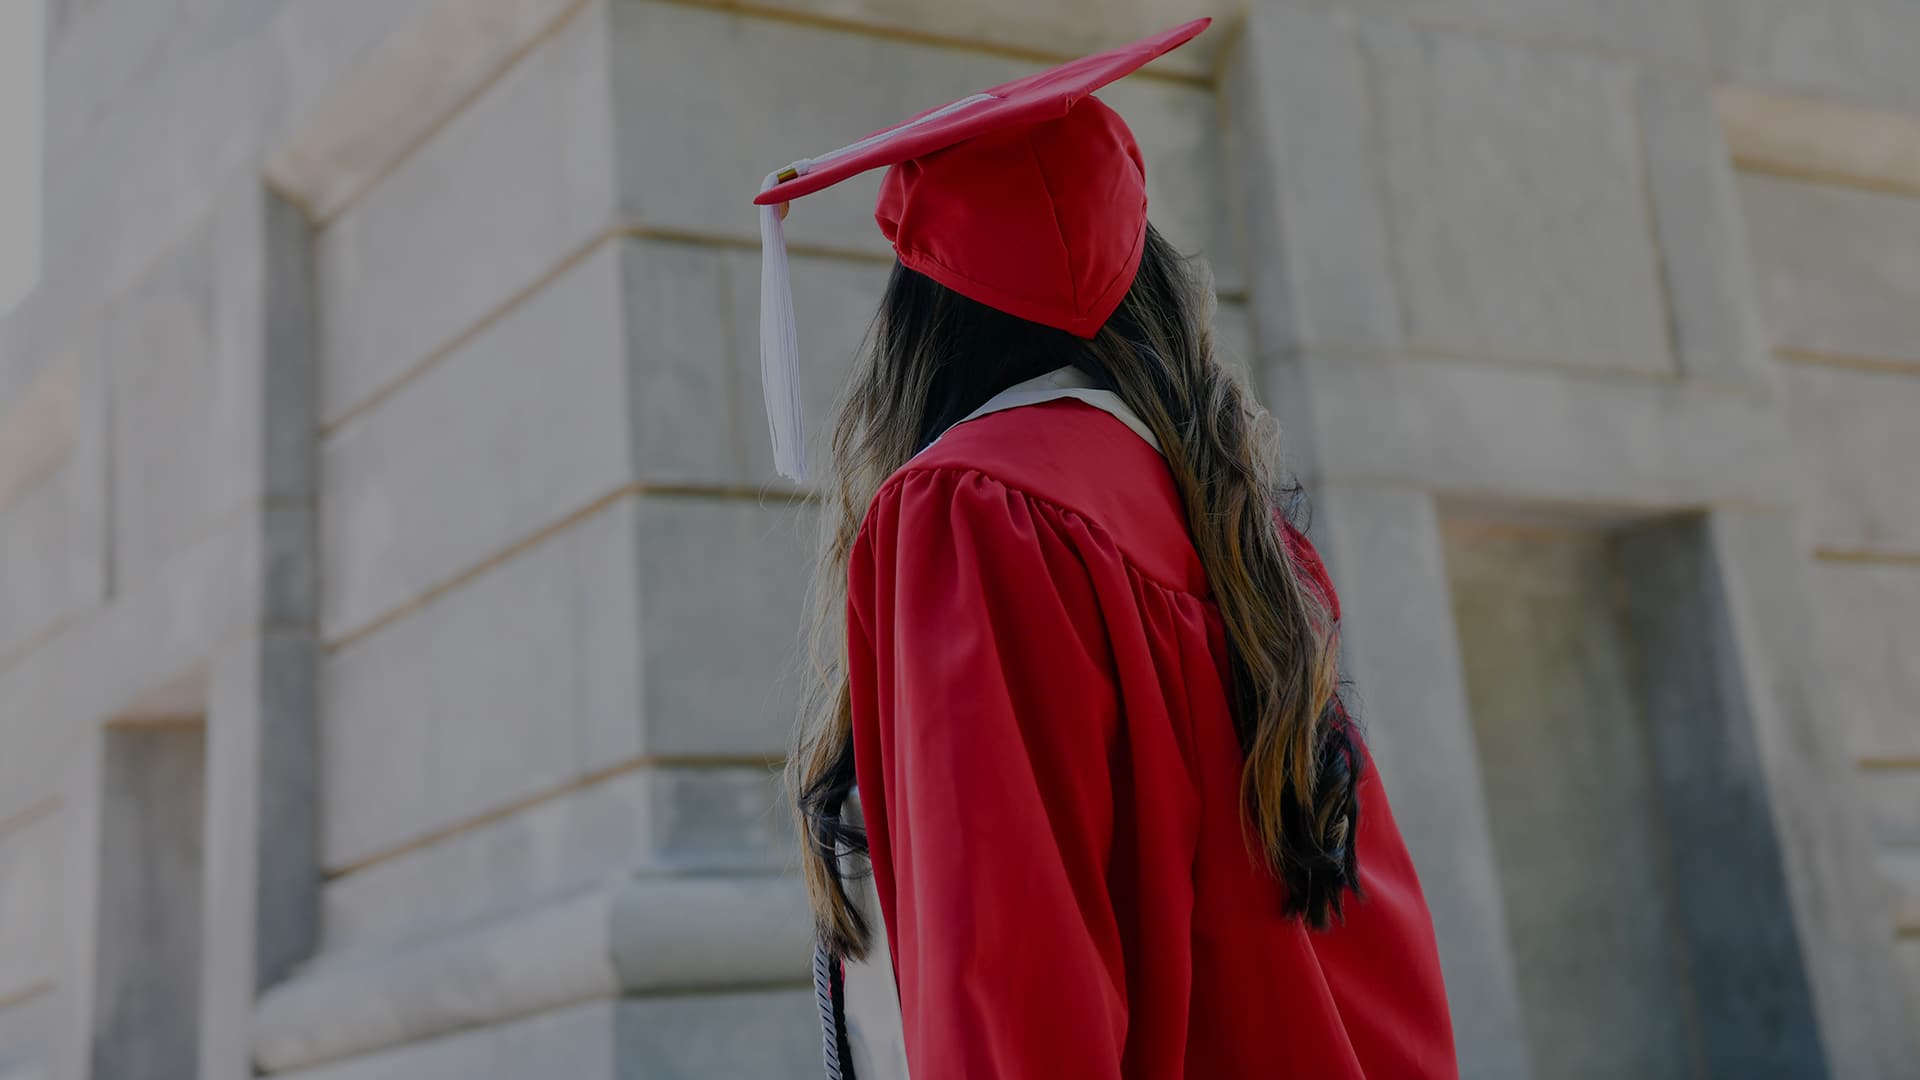 A student in red graduation robes turns around to look up at the Belltower.